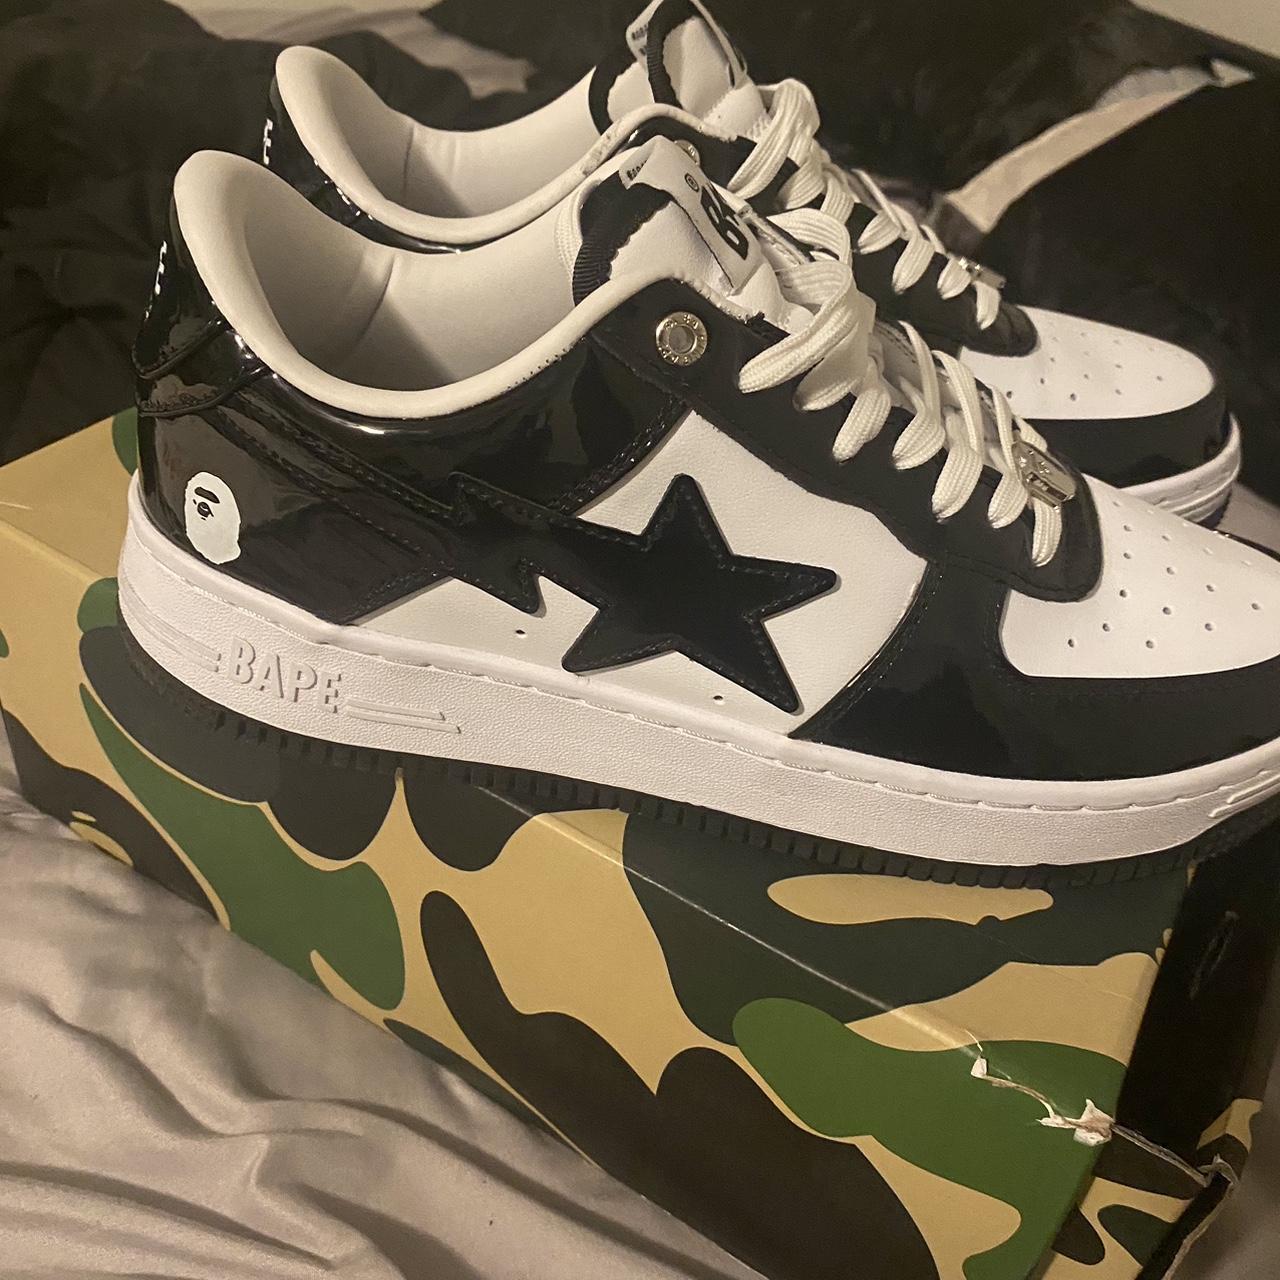 Black and White Bapesta Size 10 Message me if you’re... - Depop